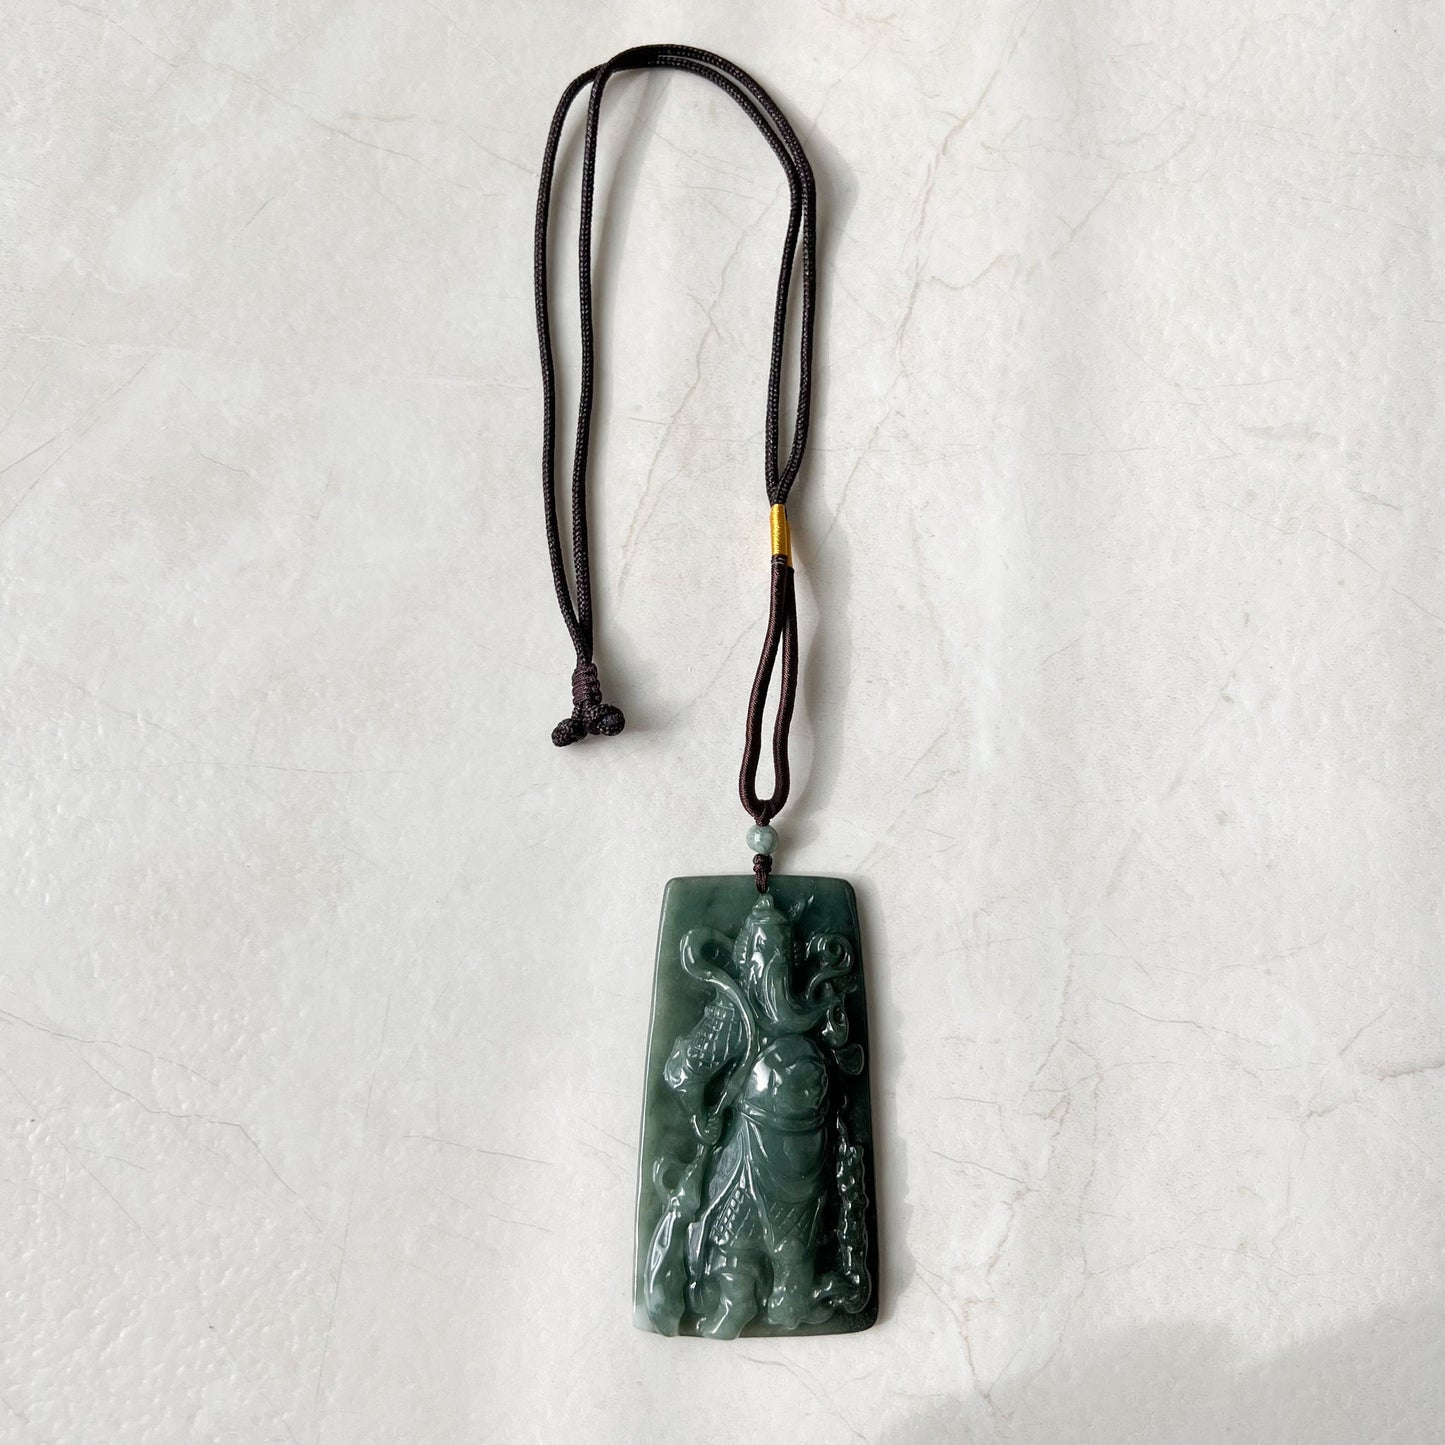 Large Green Jadeite Jade Guan Yu Guan Gong Carved Pendant Necklace, YJ-0621-0244293 - AriaDesignCollection